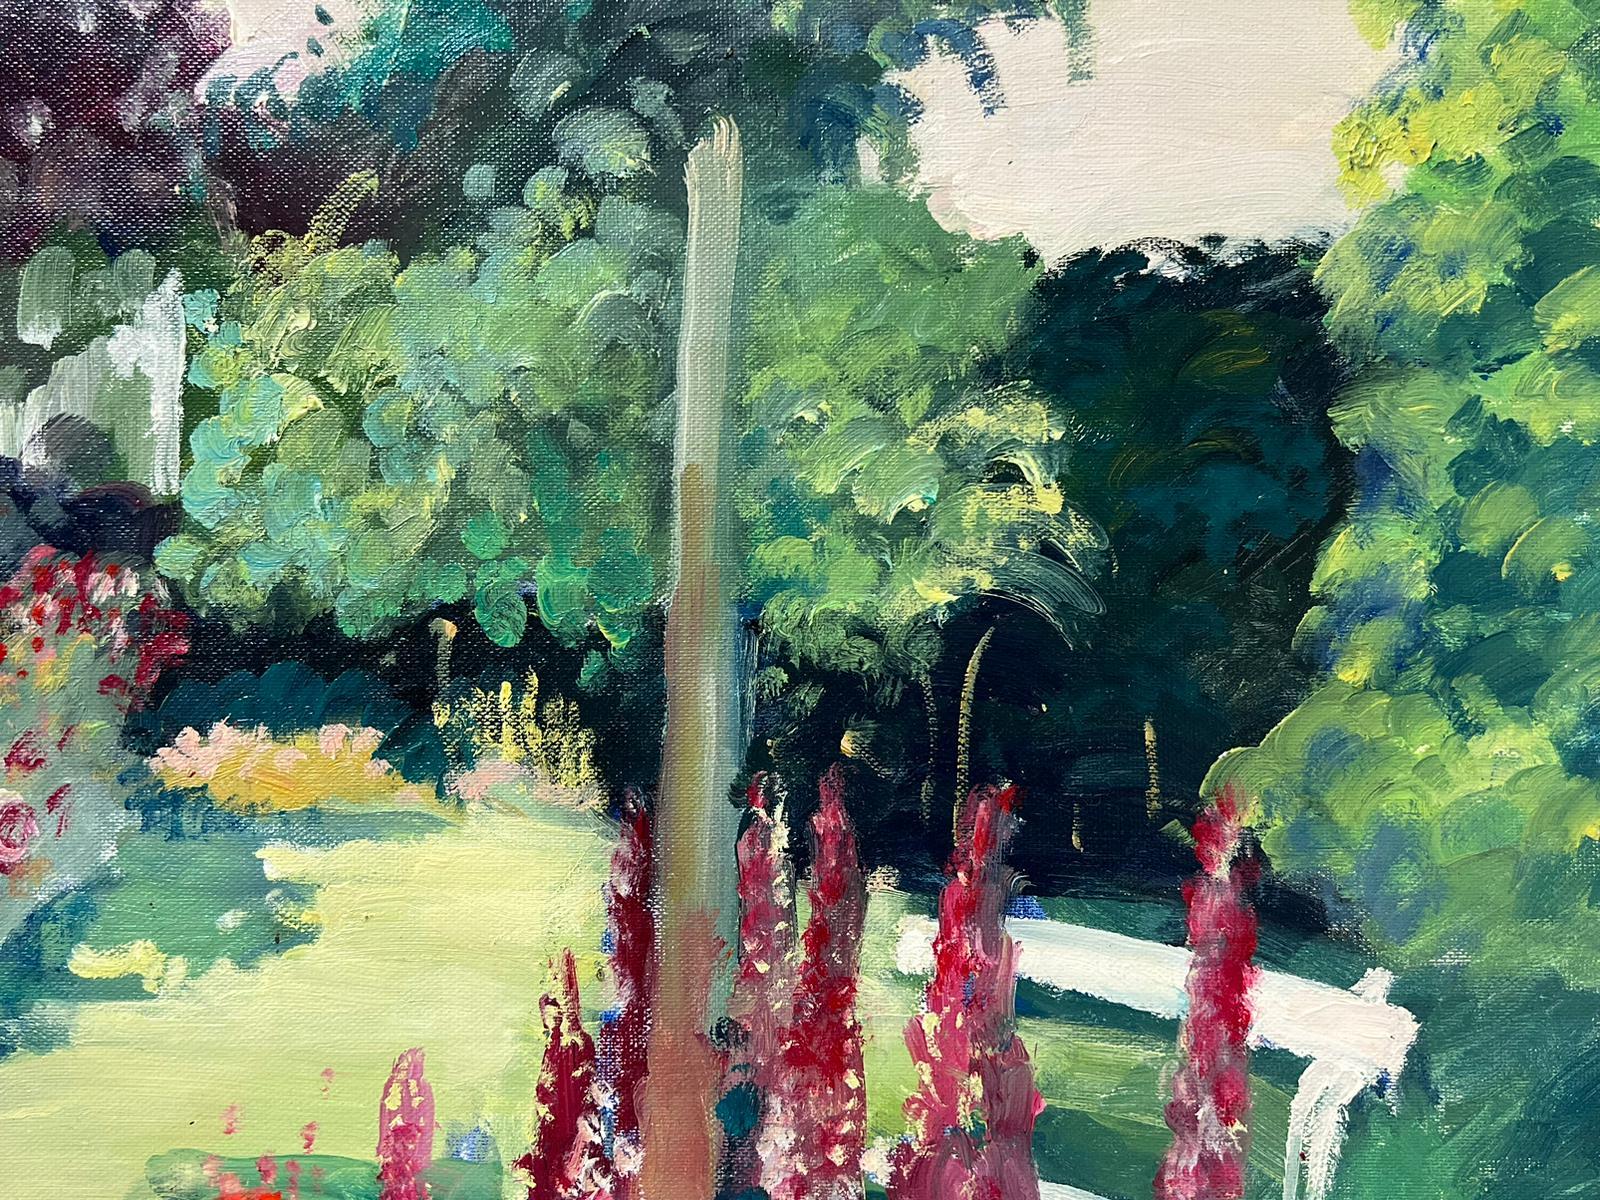 Artist/ School: Guy Benard (French b.1928) signed lower corner. Painter from Rouen, Normandy, exhibited throughout France. 

Title: Le Jardin du Peintre

Medium:  signed oil on canvas, unframed and inscribed verso

size: 18 x 21.5